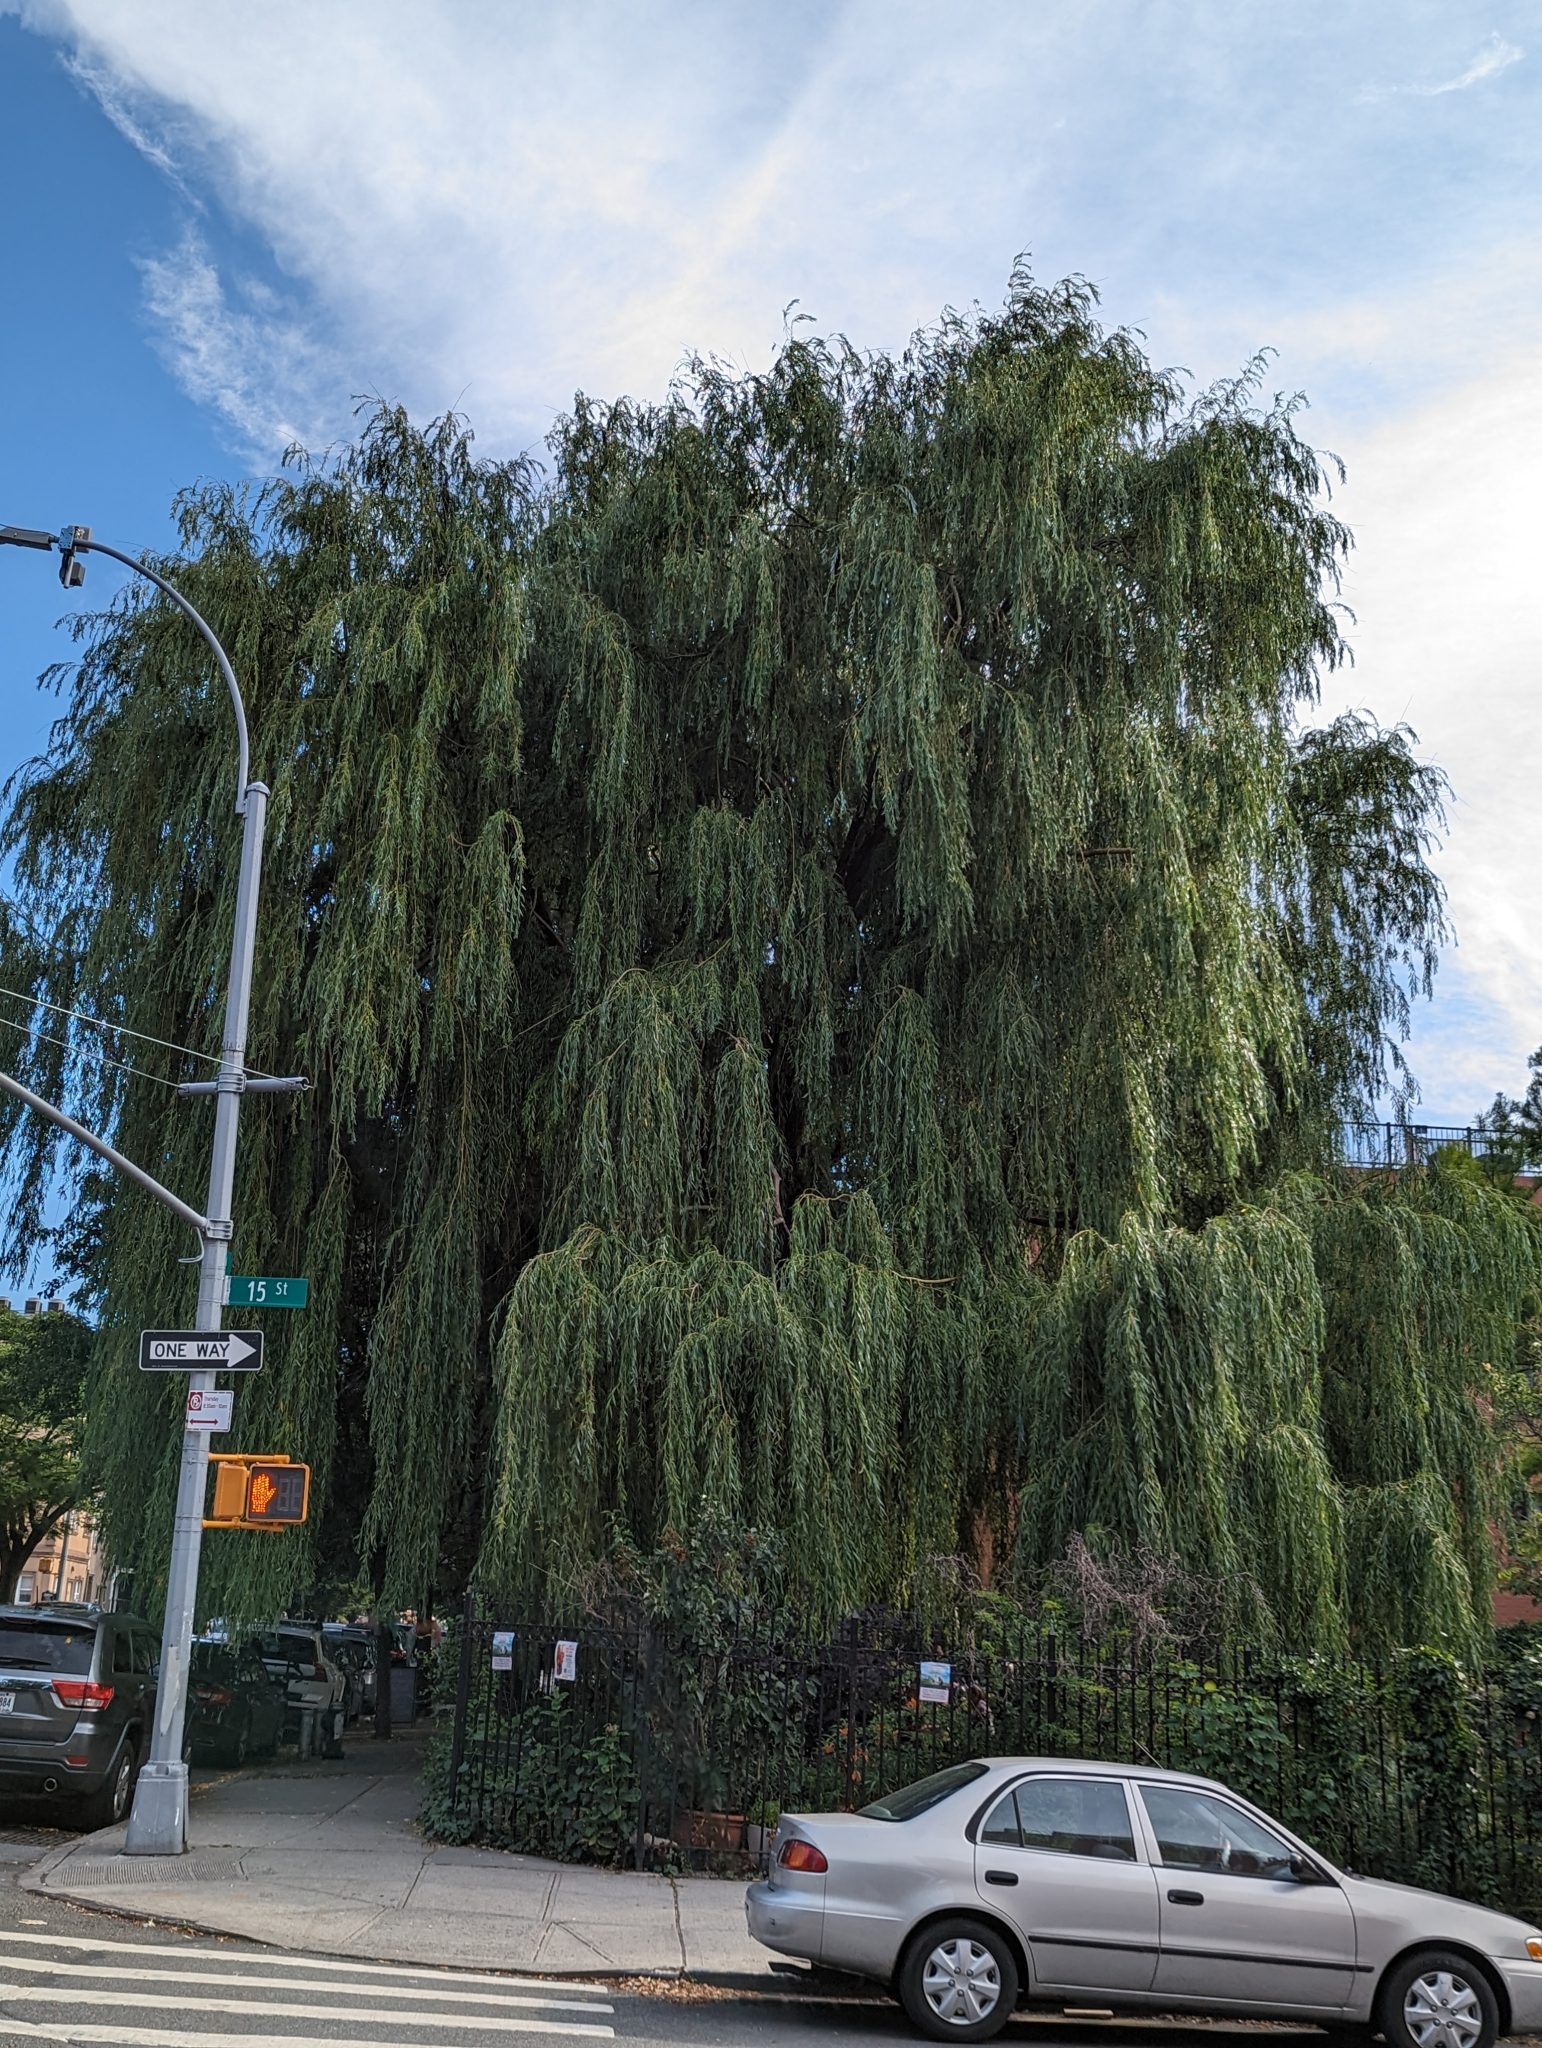 A very big willow tree.